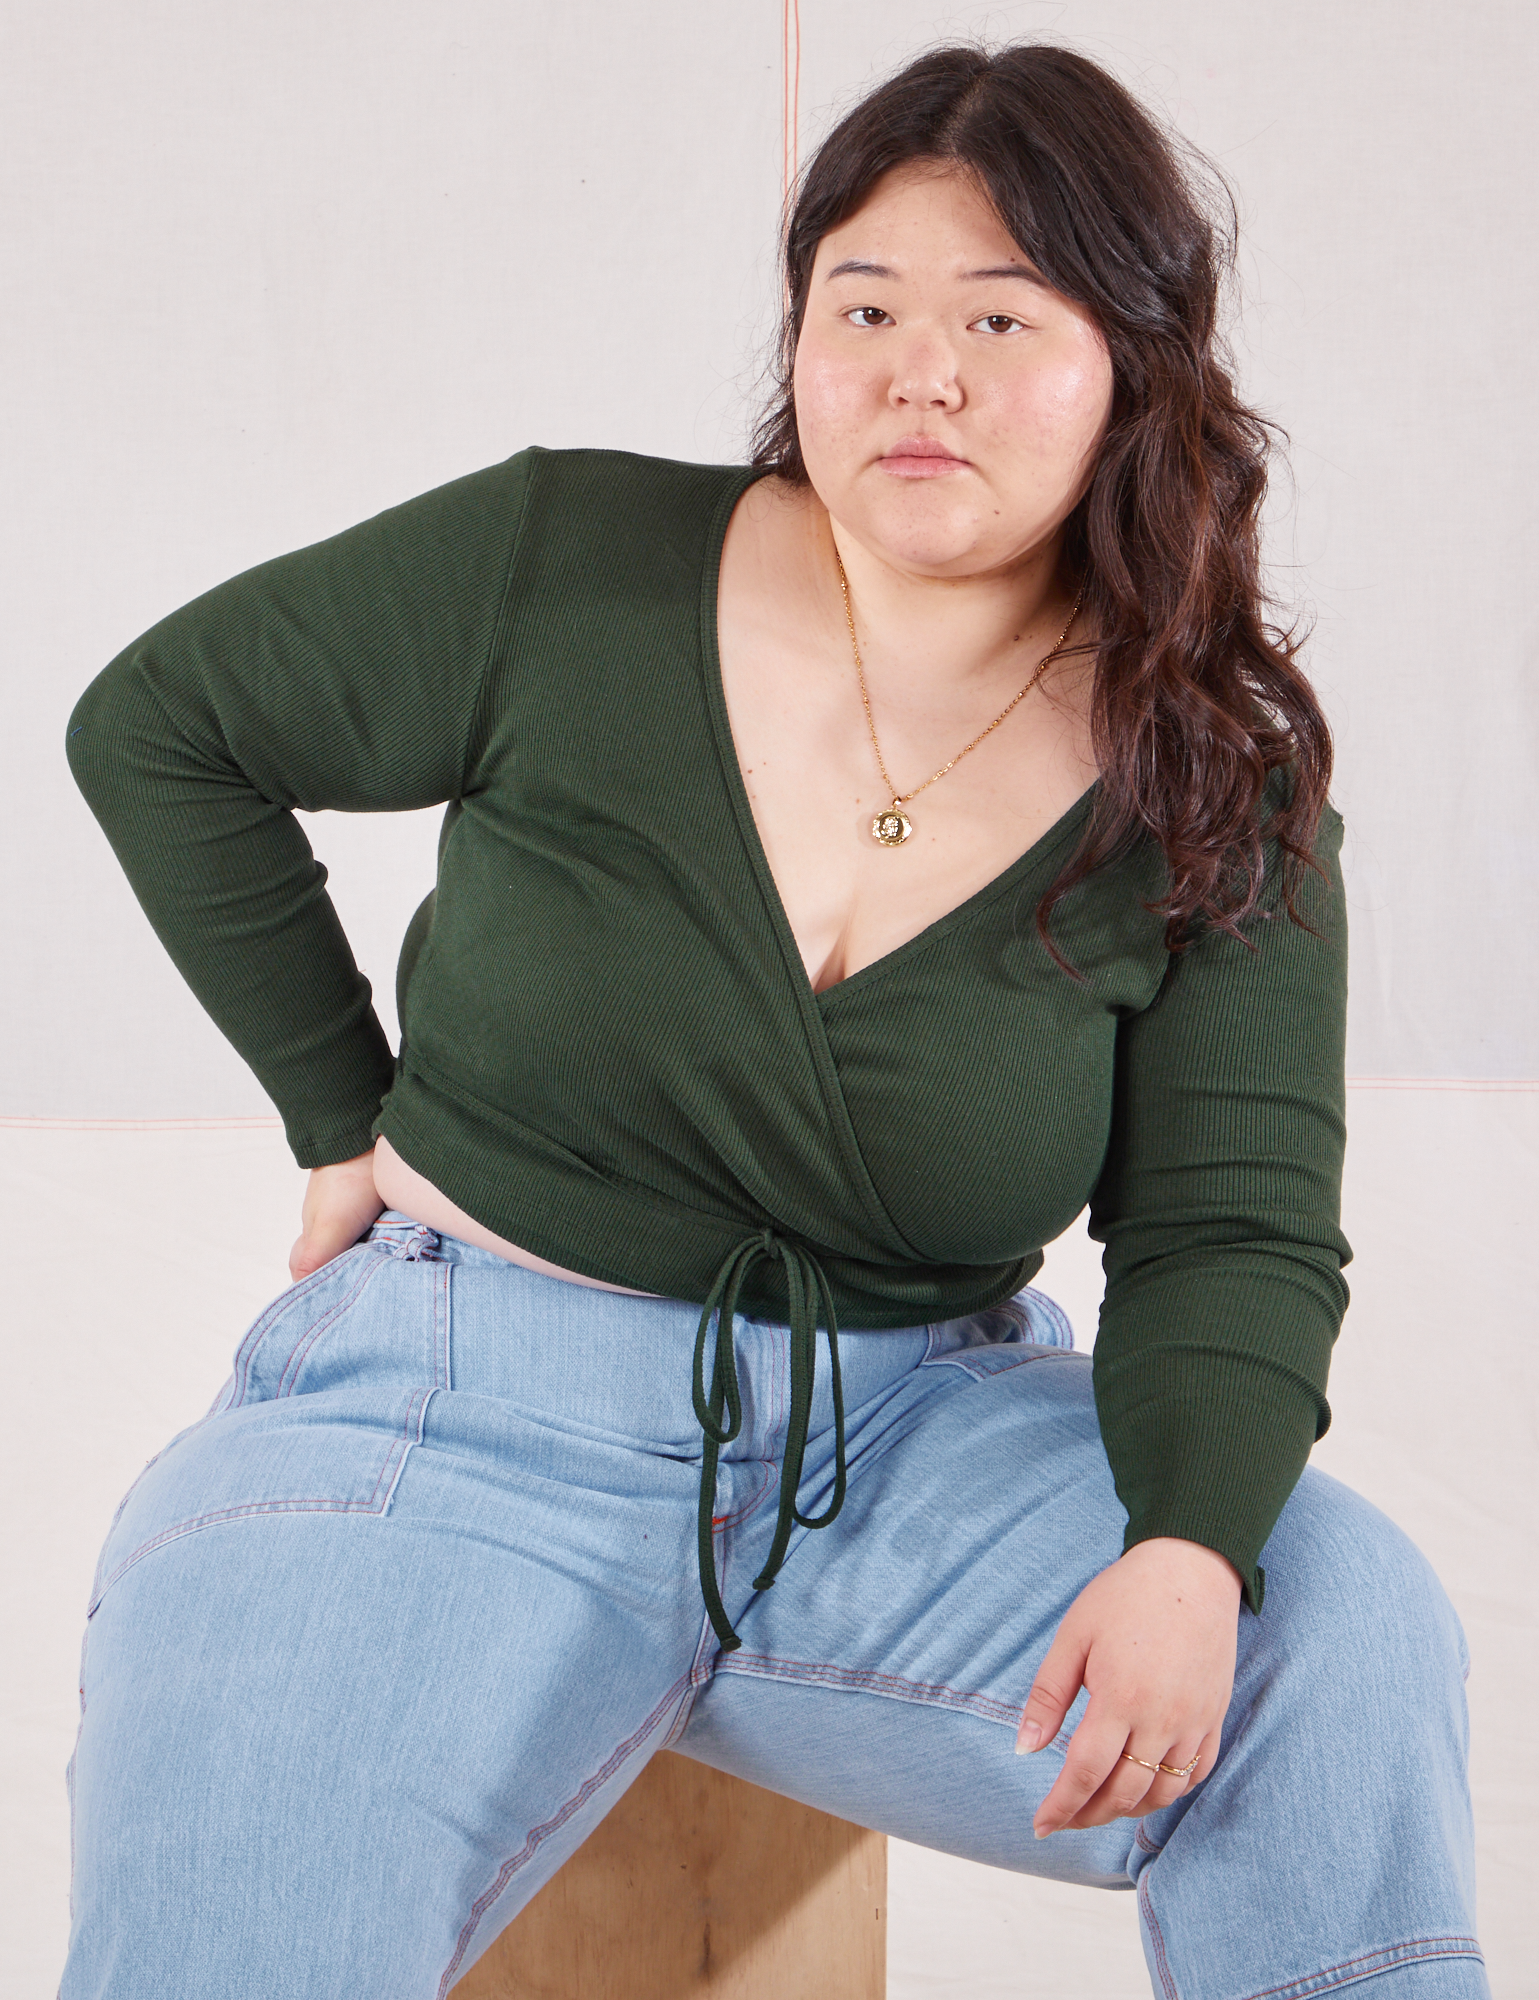 Ashley is wearing Wrap Top in Swamp Green and light wash Carpenter Jeans